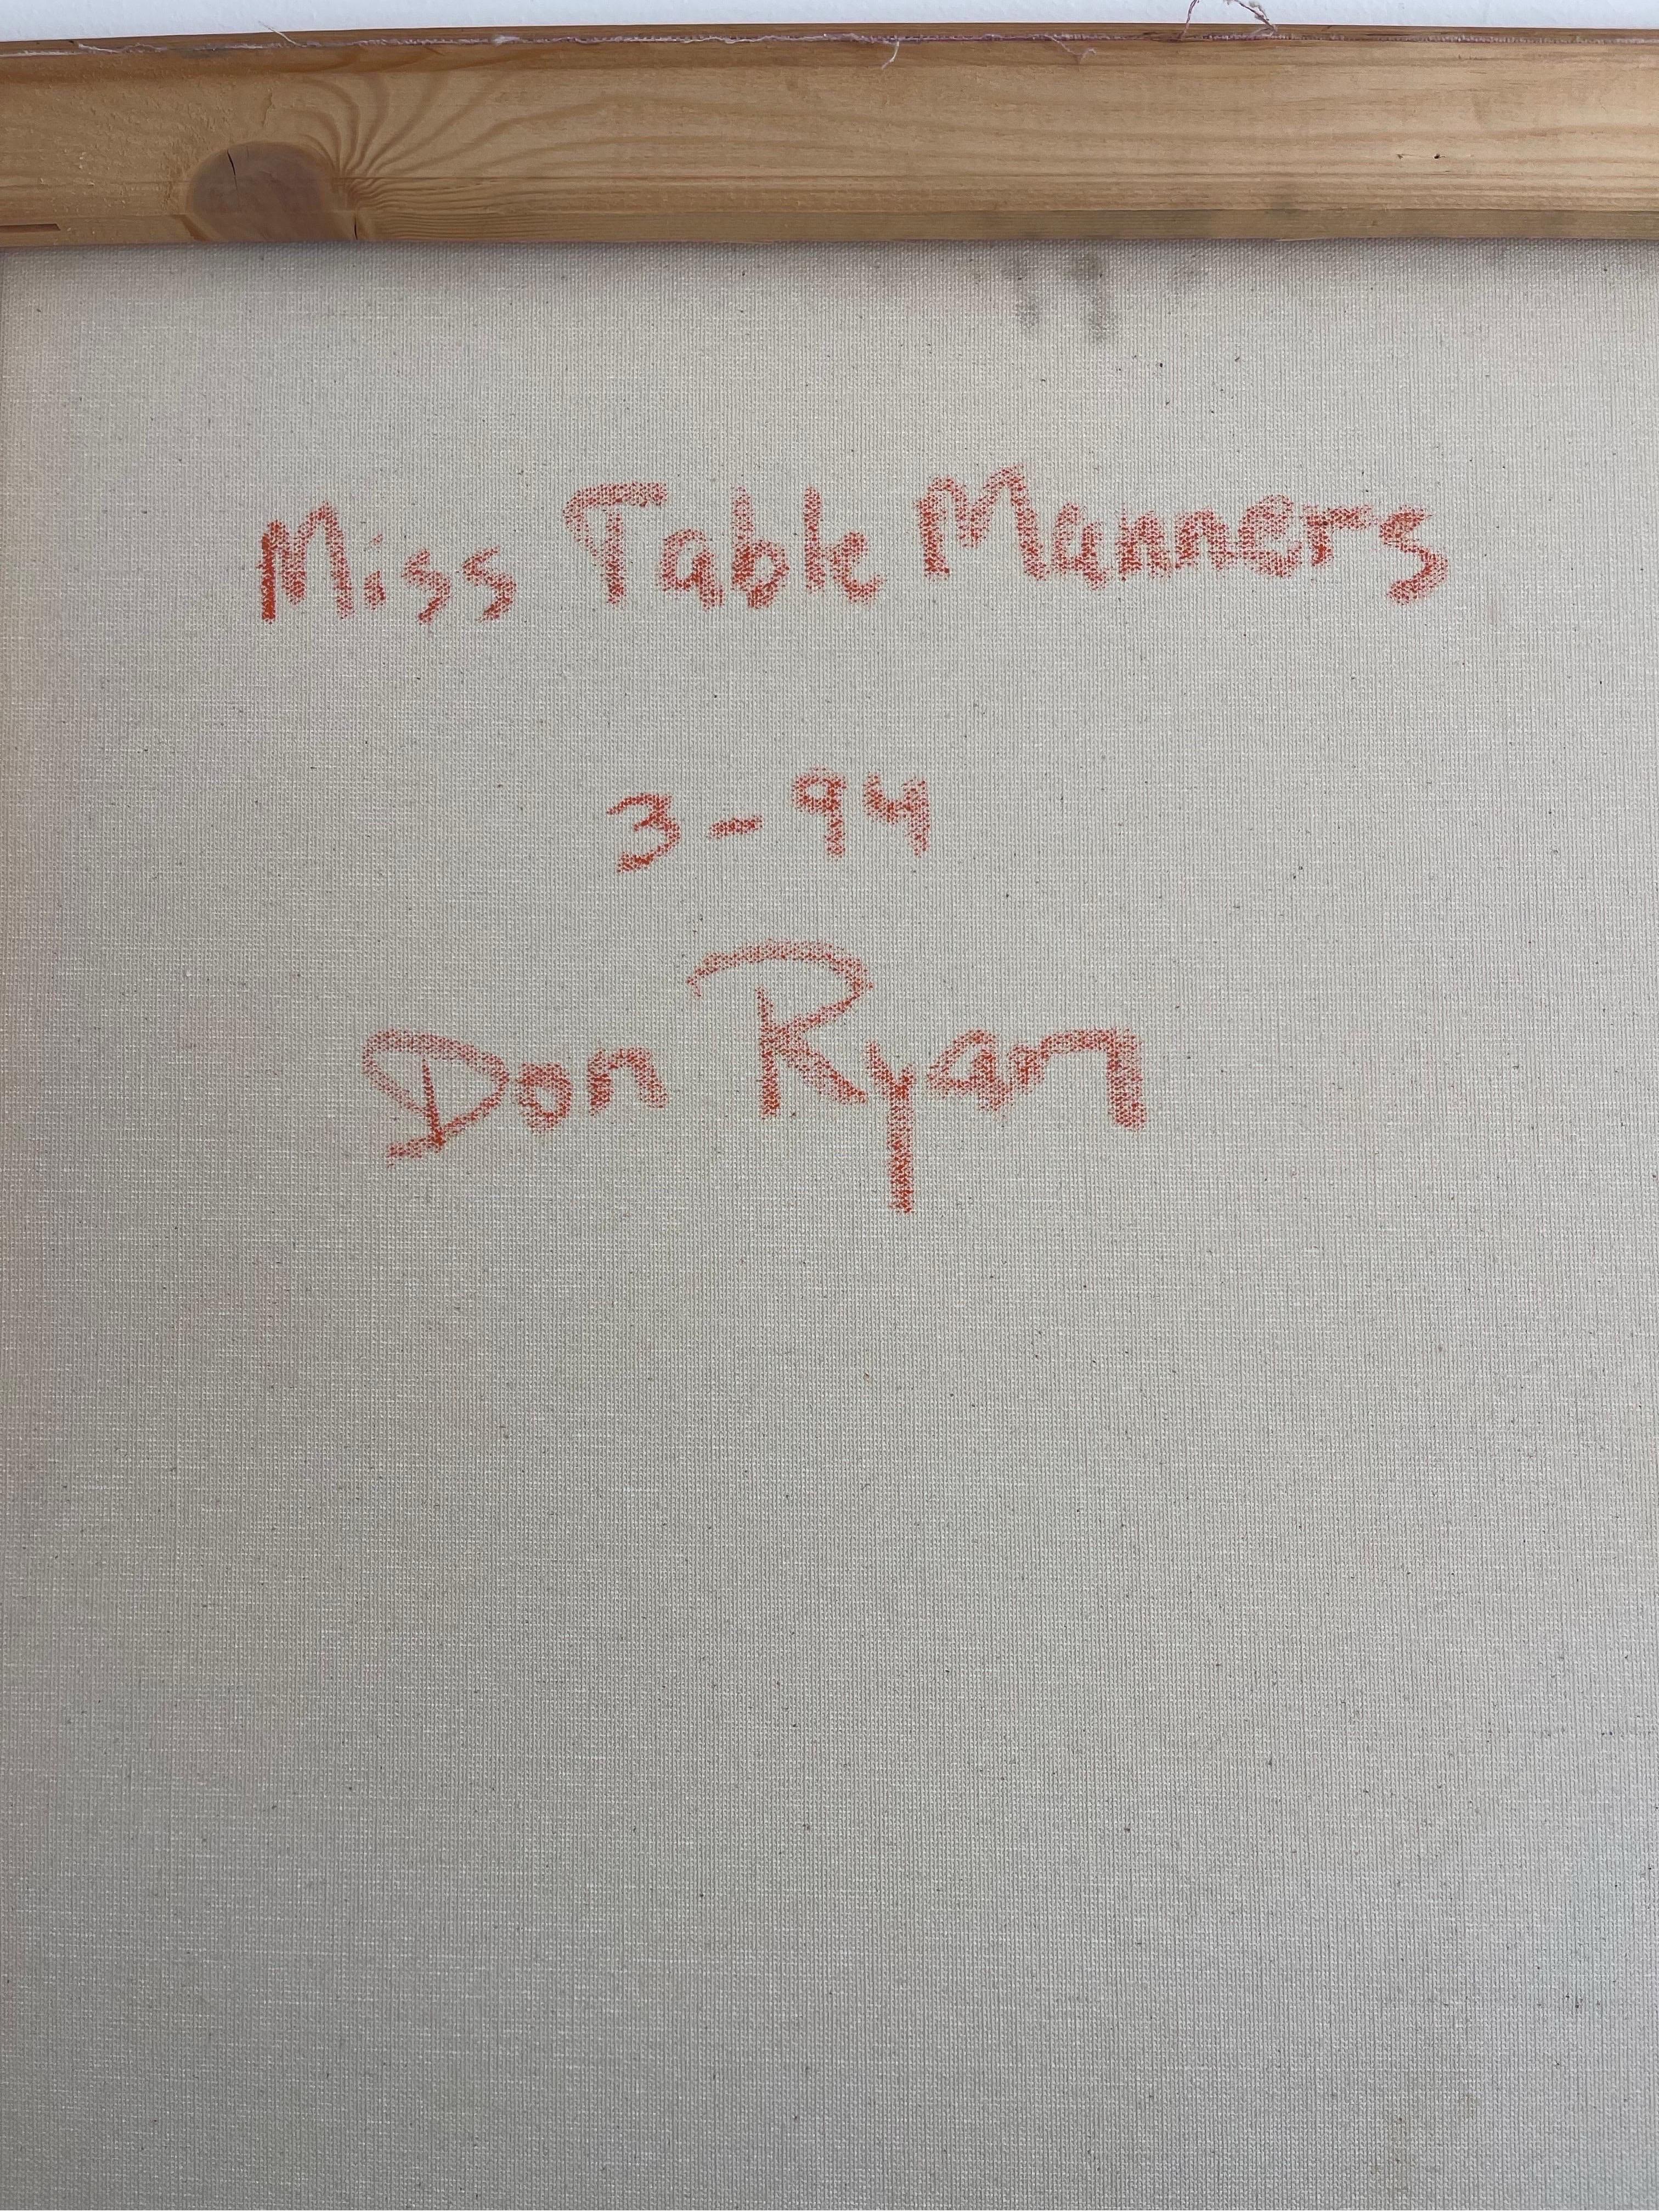 Vintage Oil Painting ‘Miss Table Manners’ 1994 by Donald K Ryan  For Sale 2